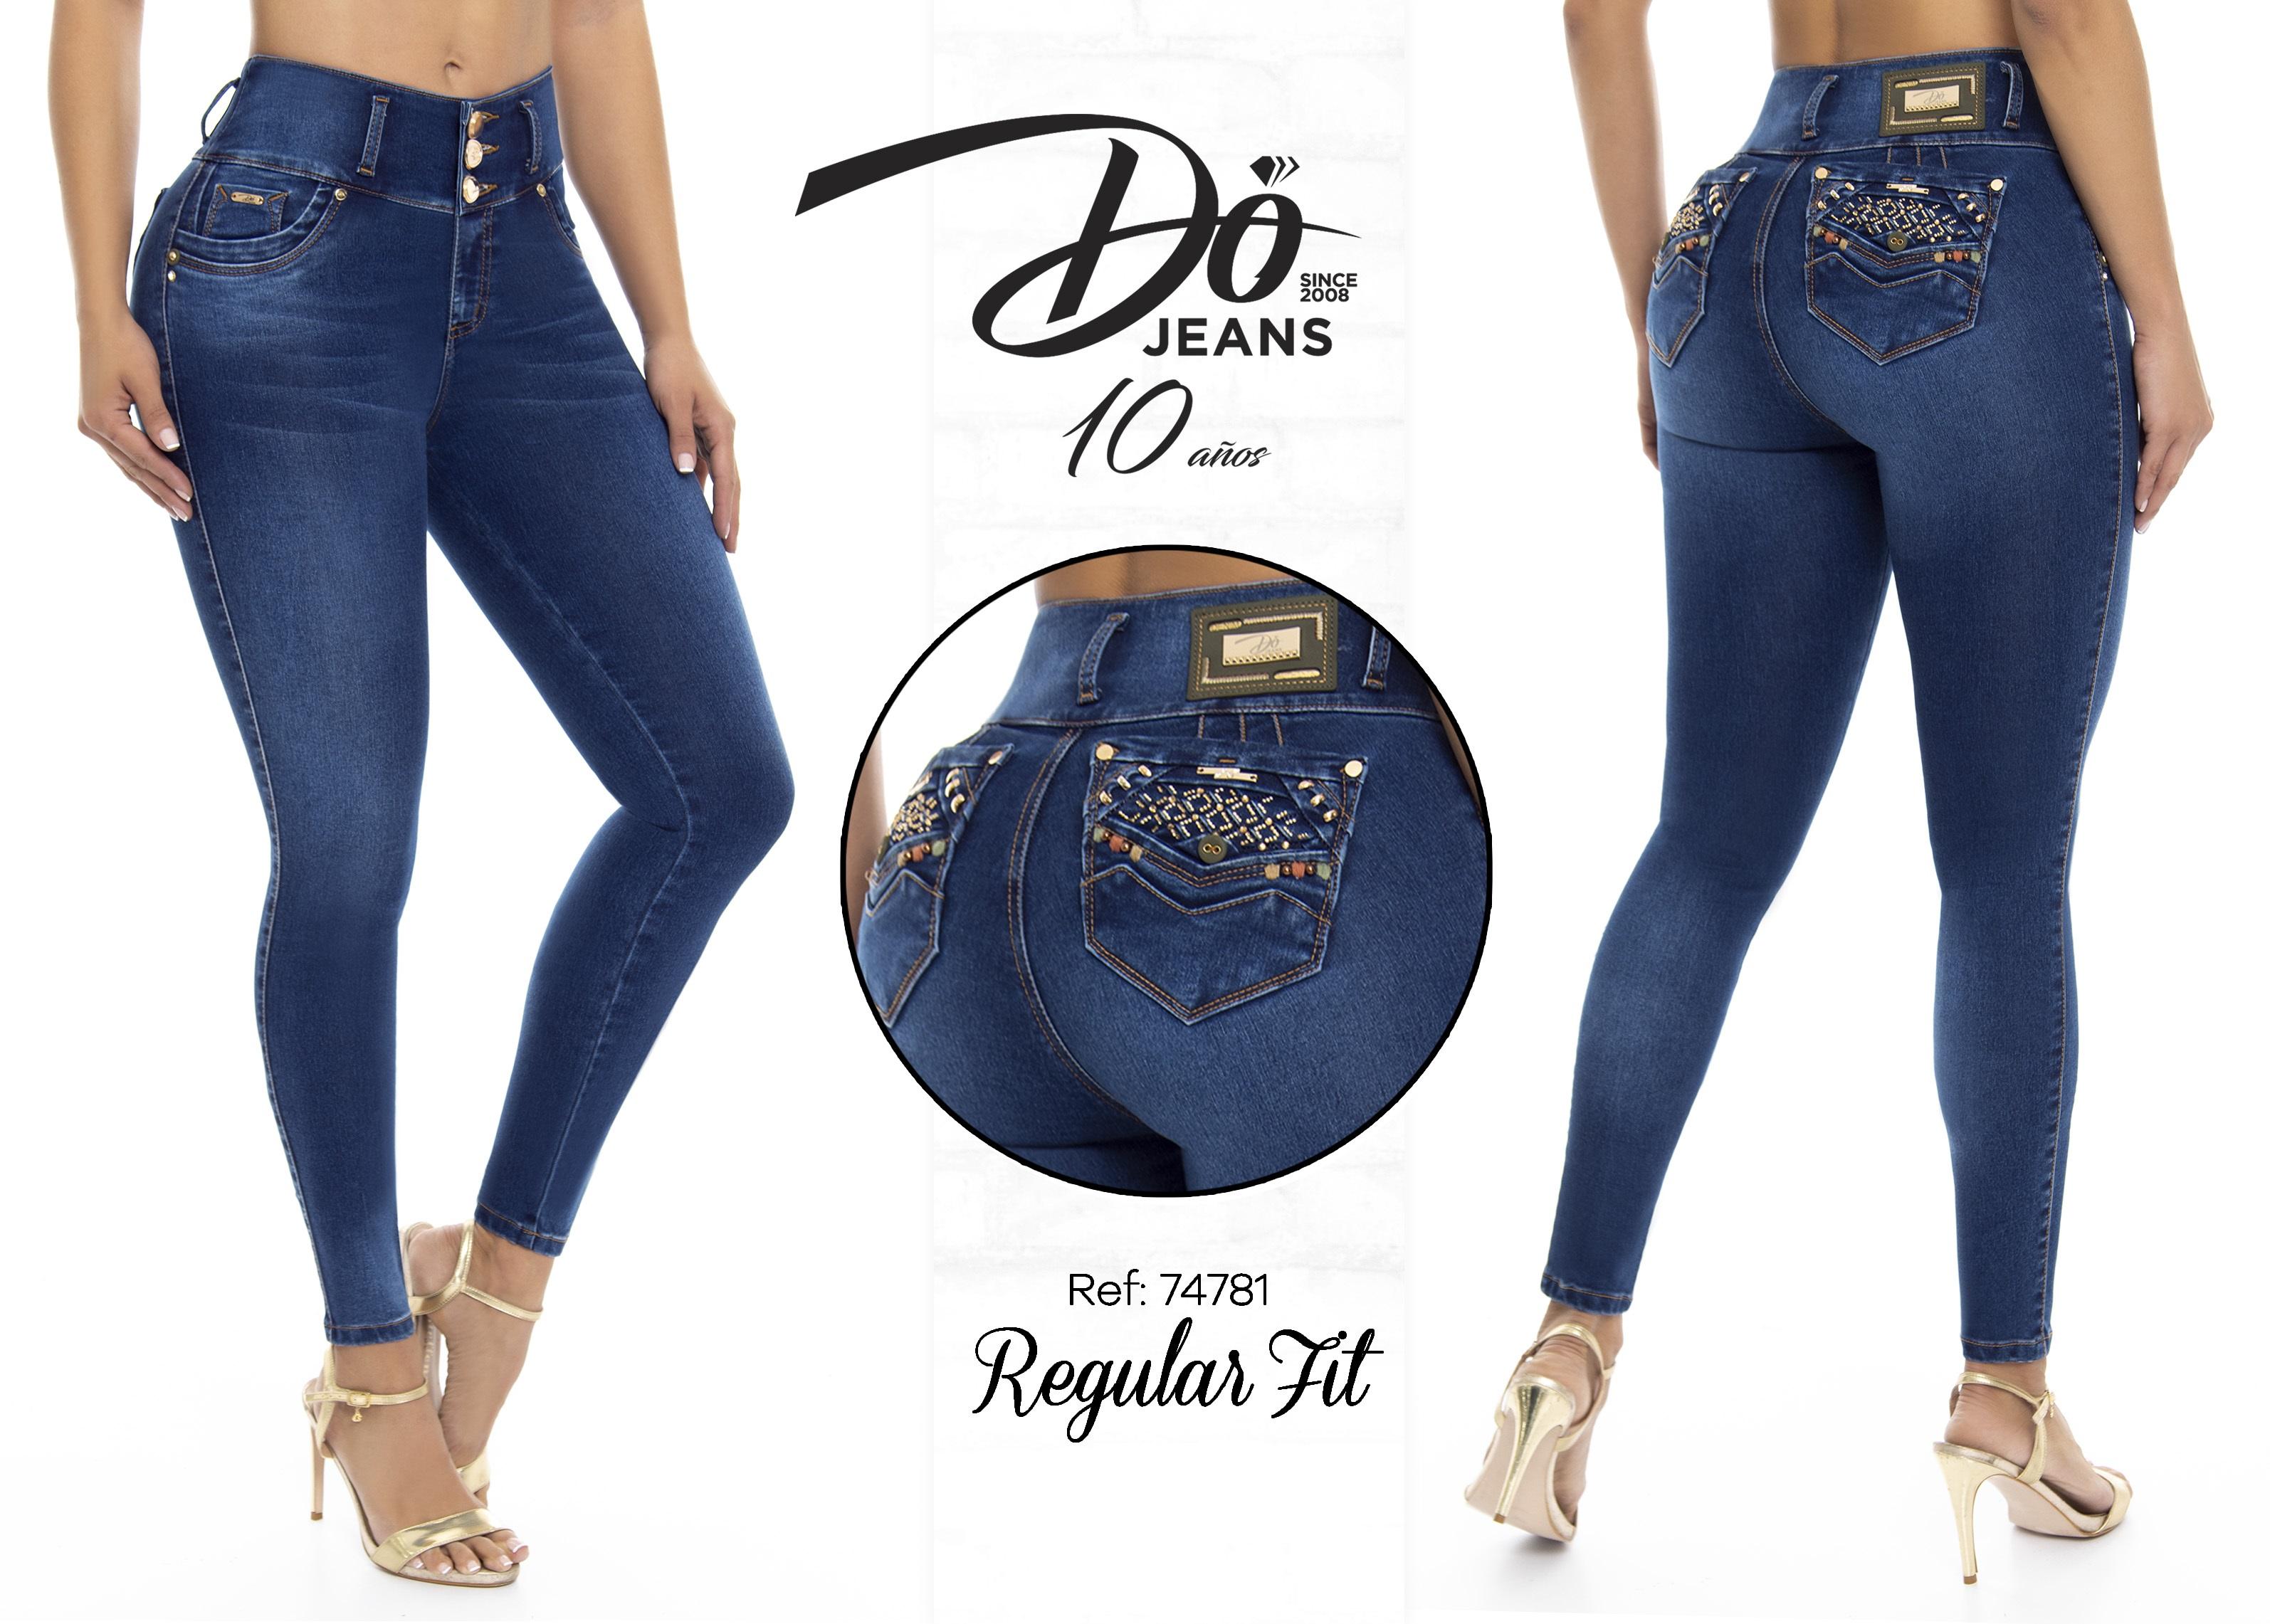 Jeans Levantacola Colombiano - Ref. 248 -74781 D